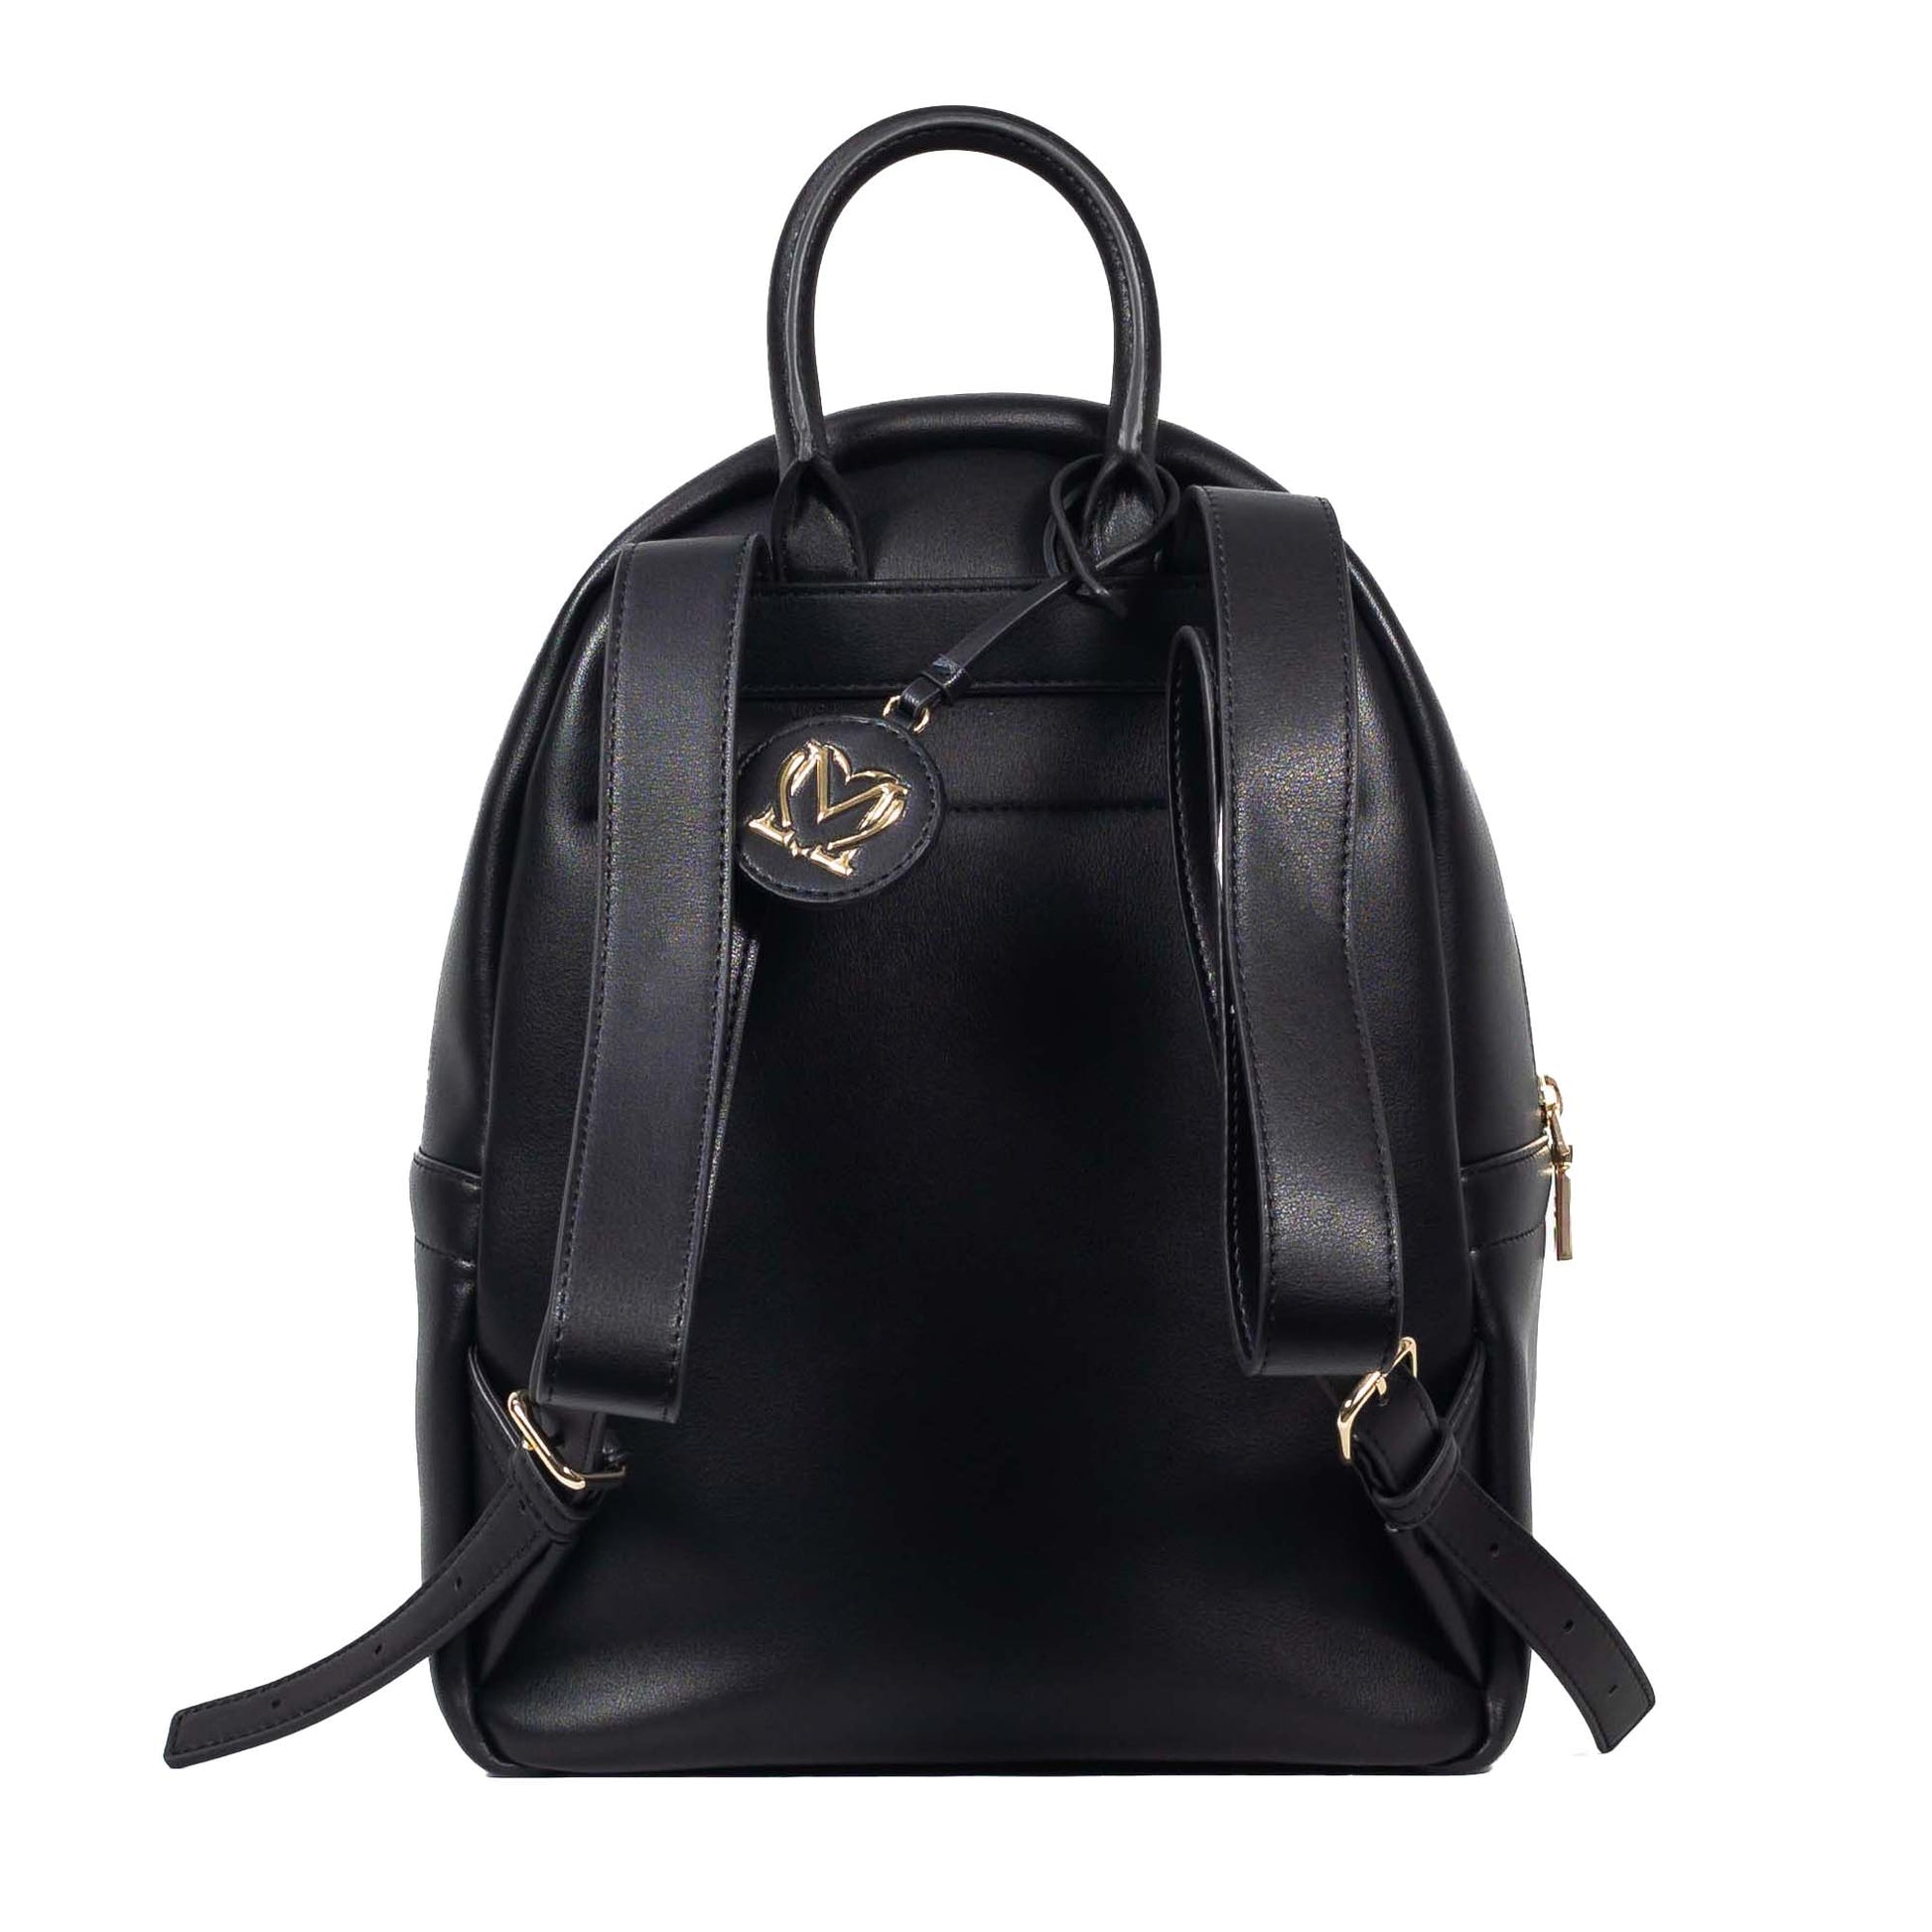 Love Moschino Faux Leather Black Backpack - JC4109PP1FLJ000A - 8054400949454